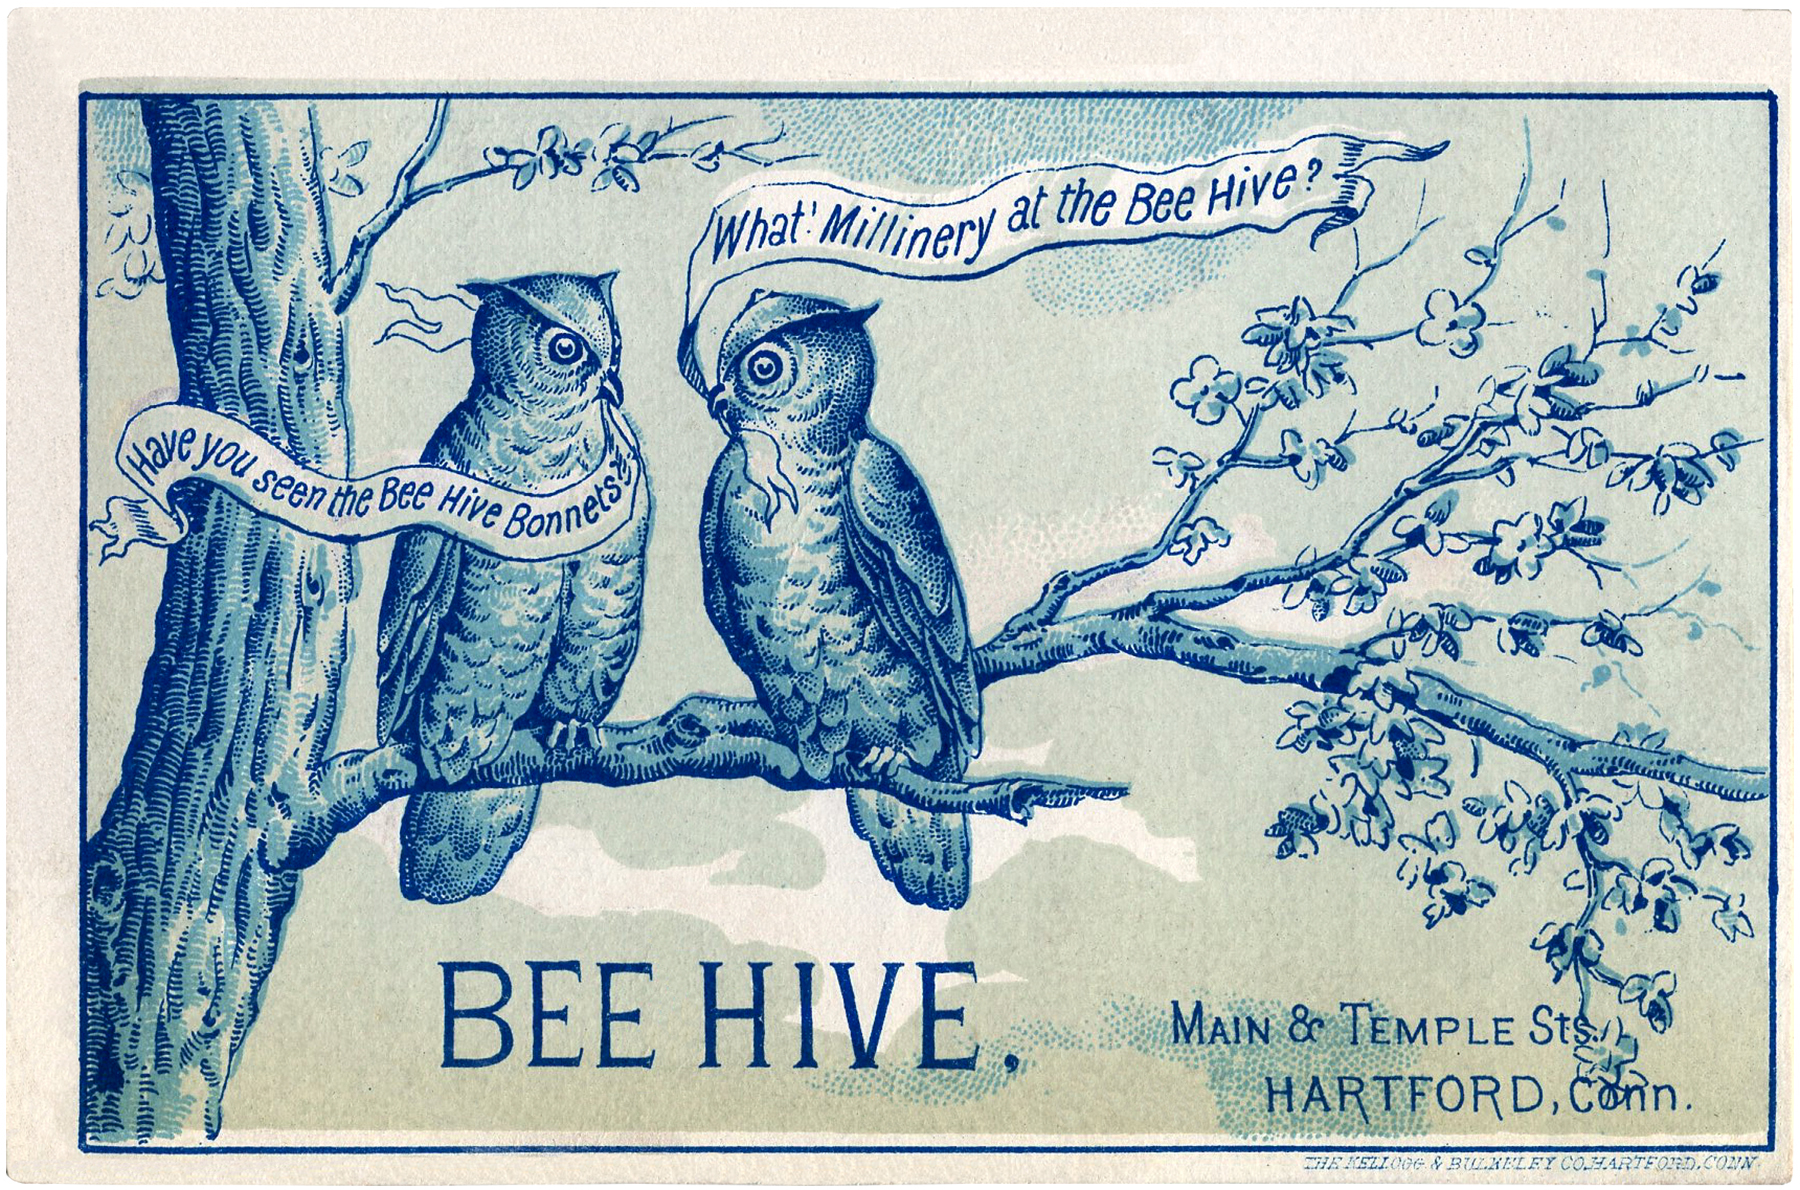 Quirky Vintage Owls Image! - The Graphics Fairy1800 x 1190